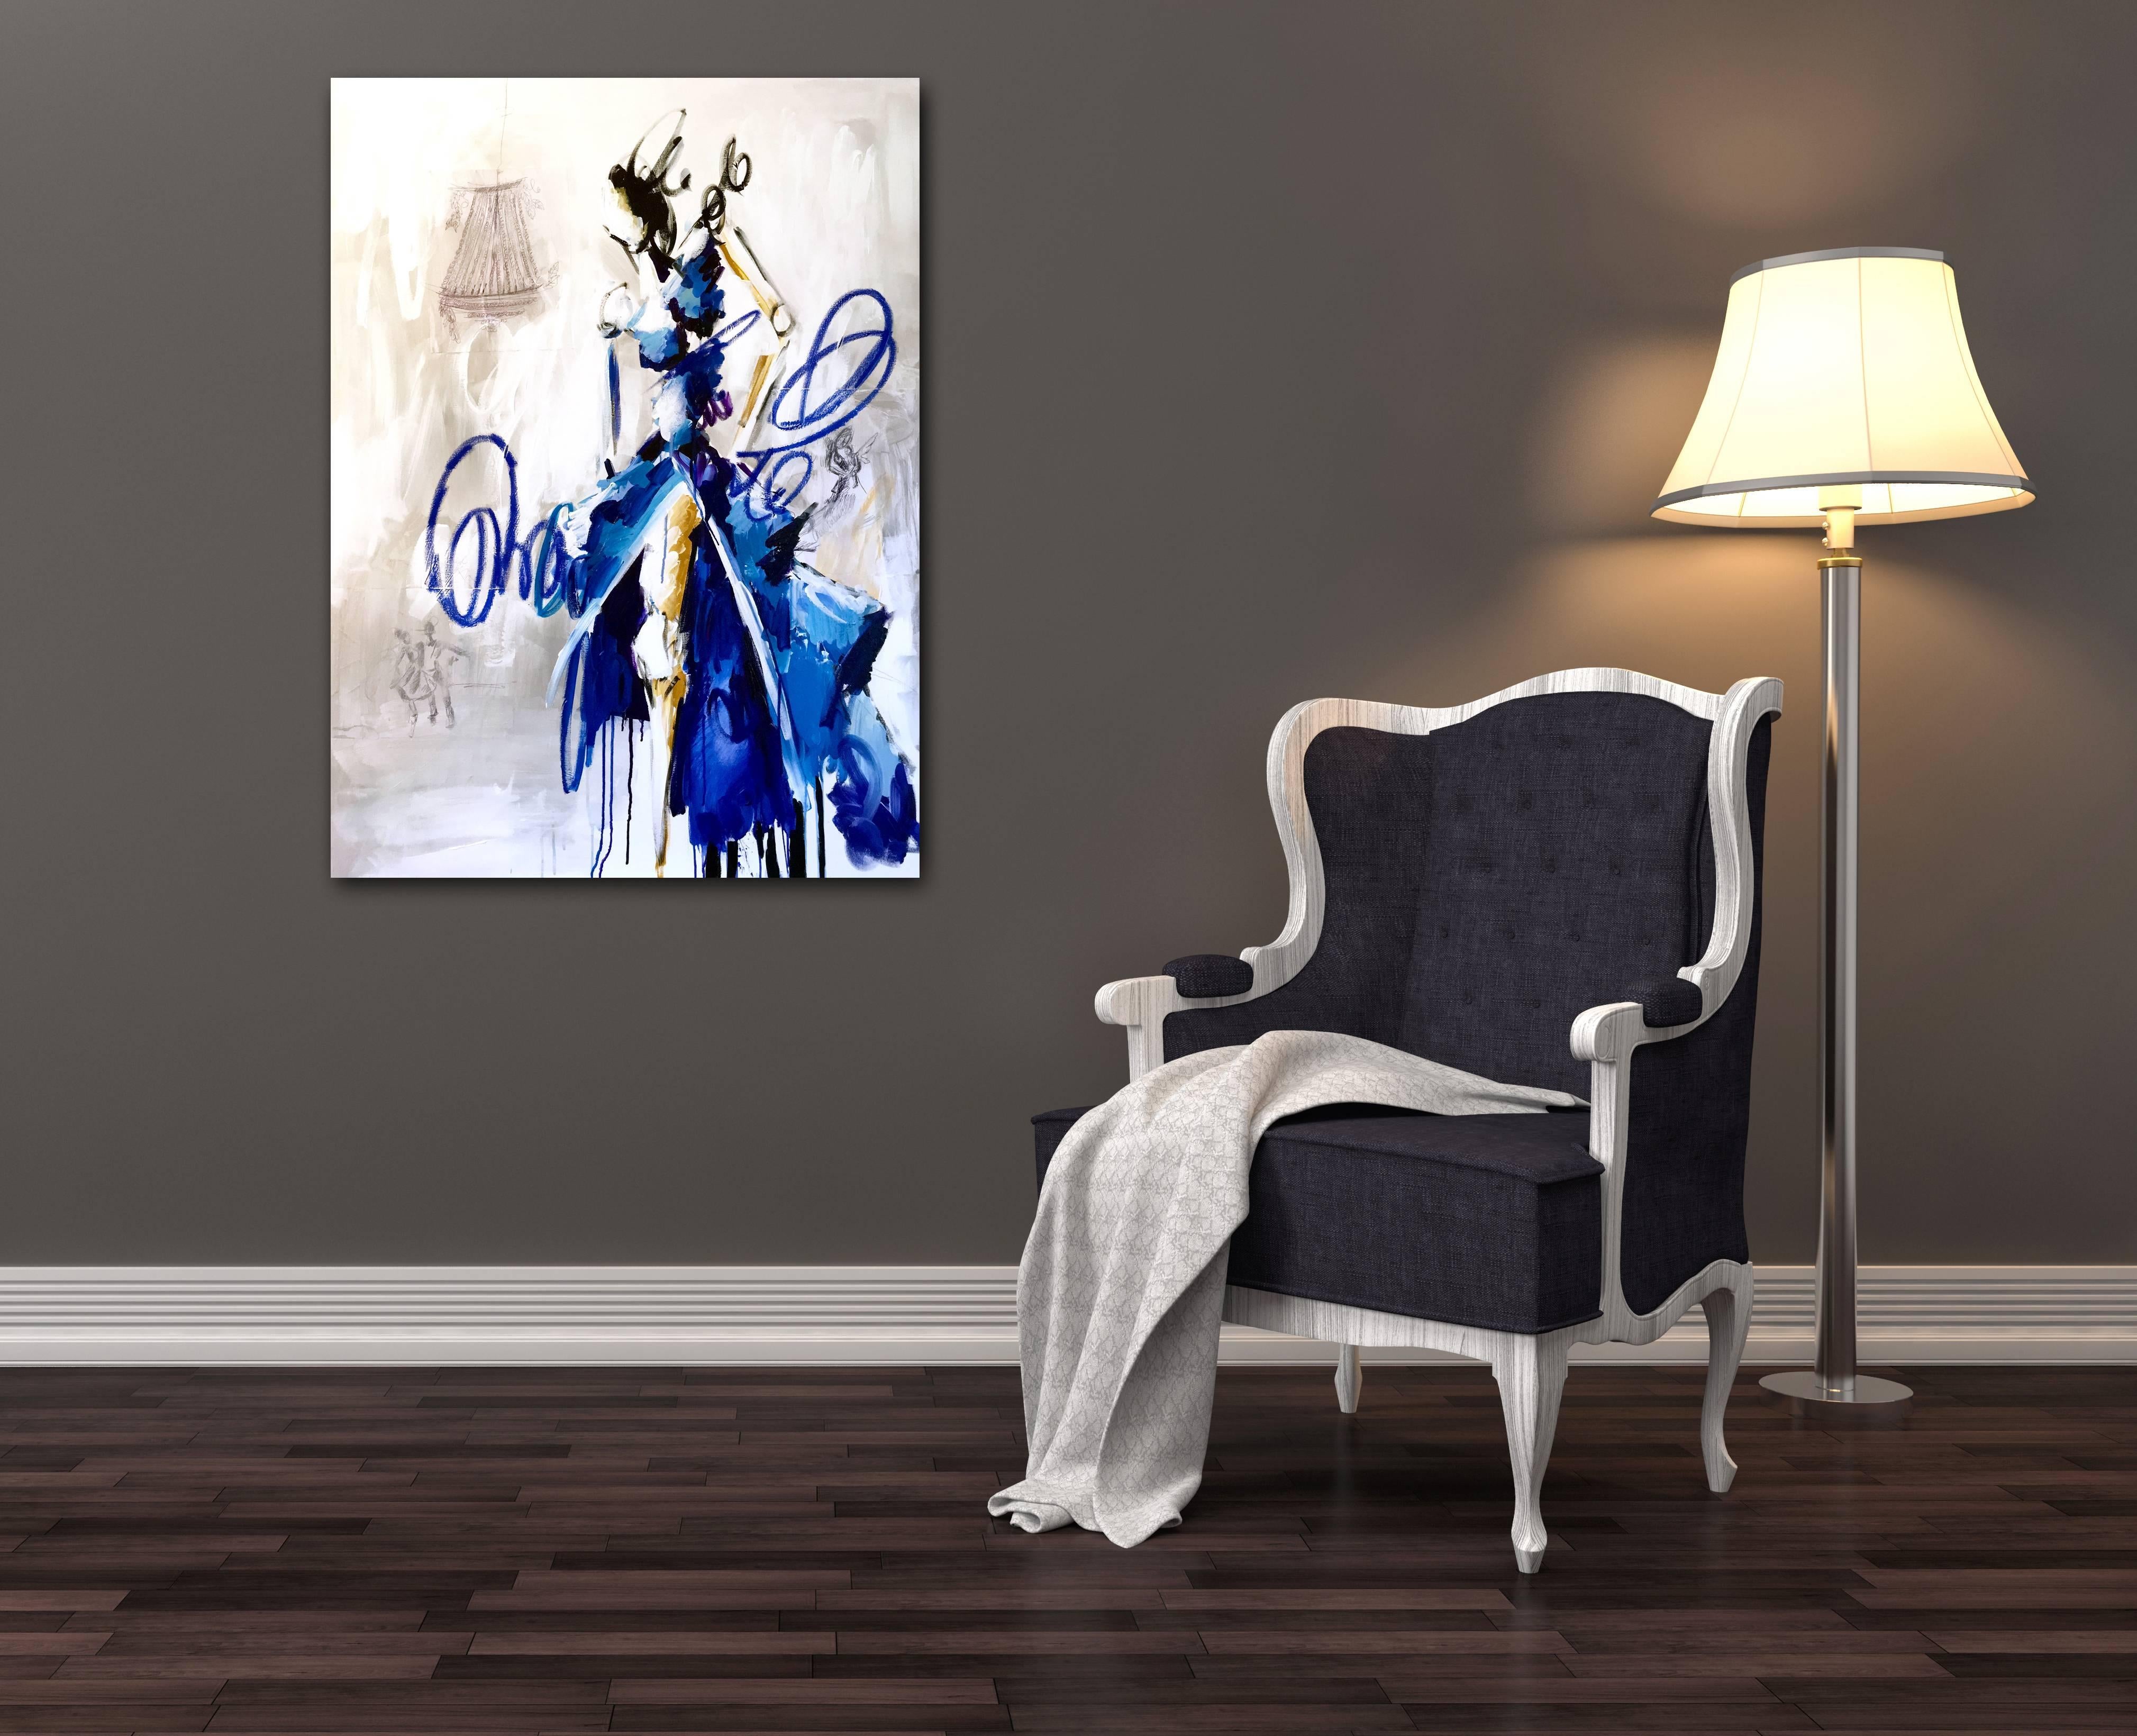 Blue Suede Shoes - Painting by Ash Almonte